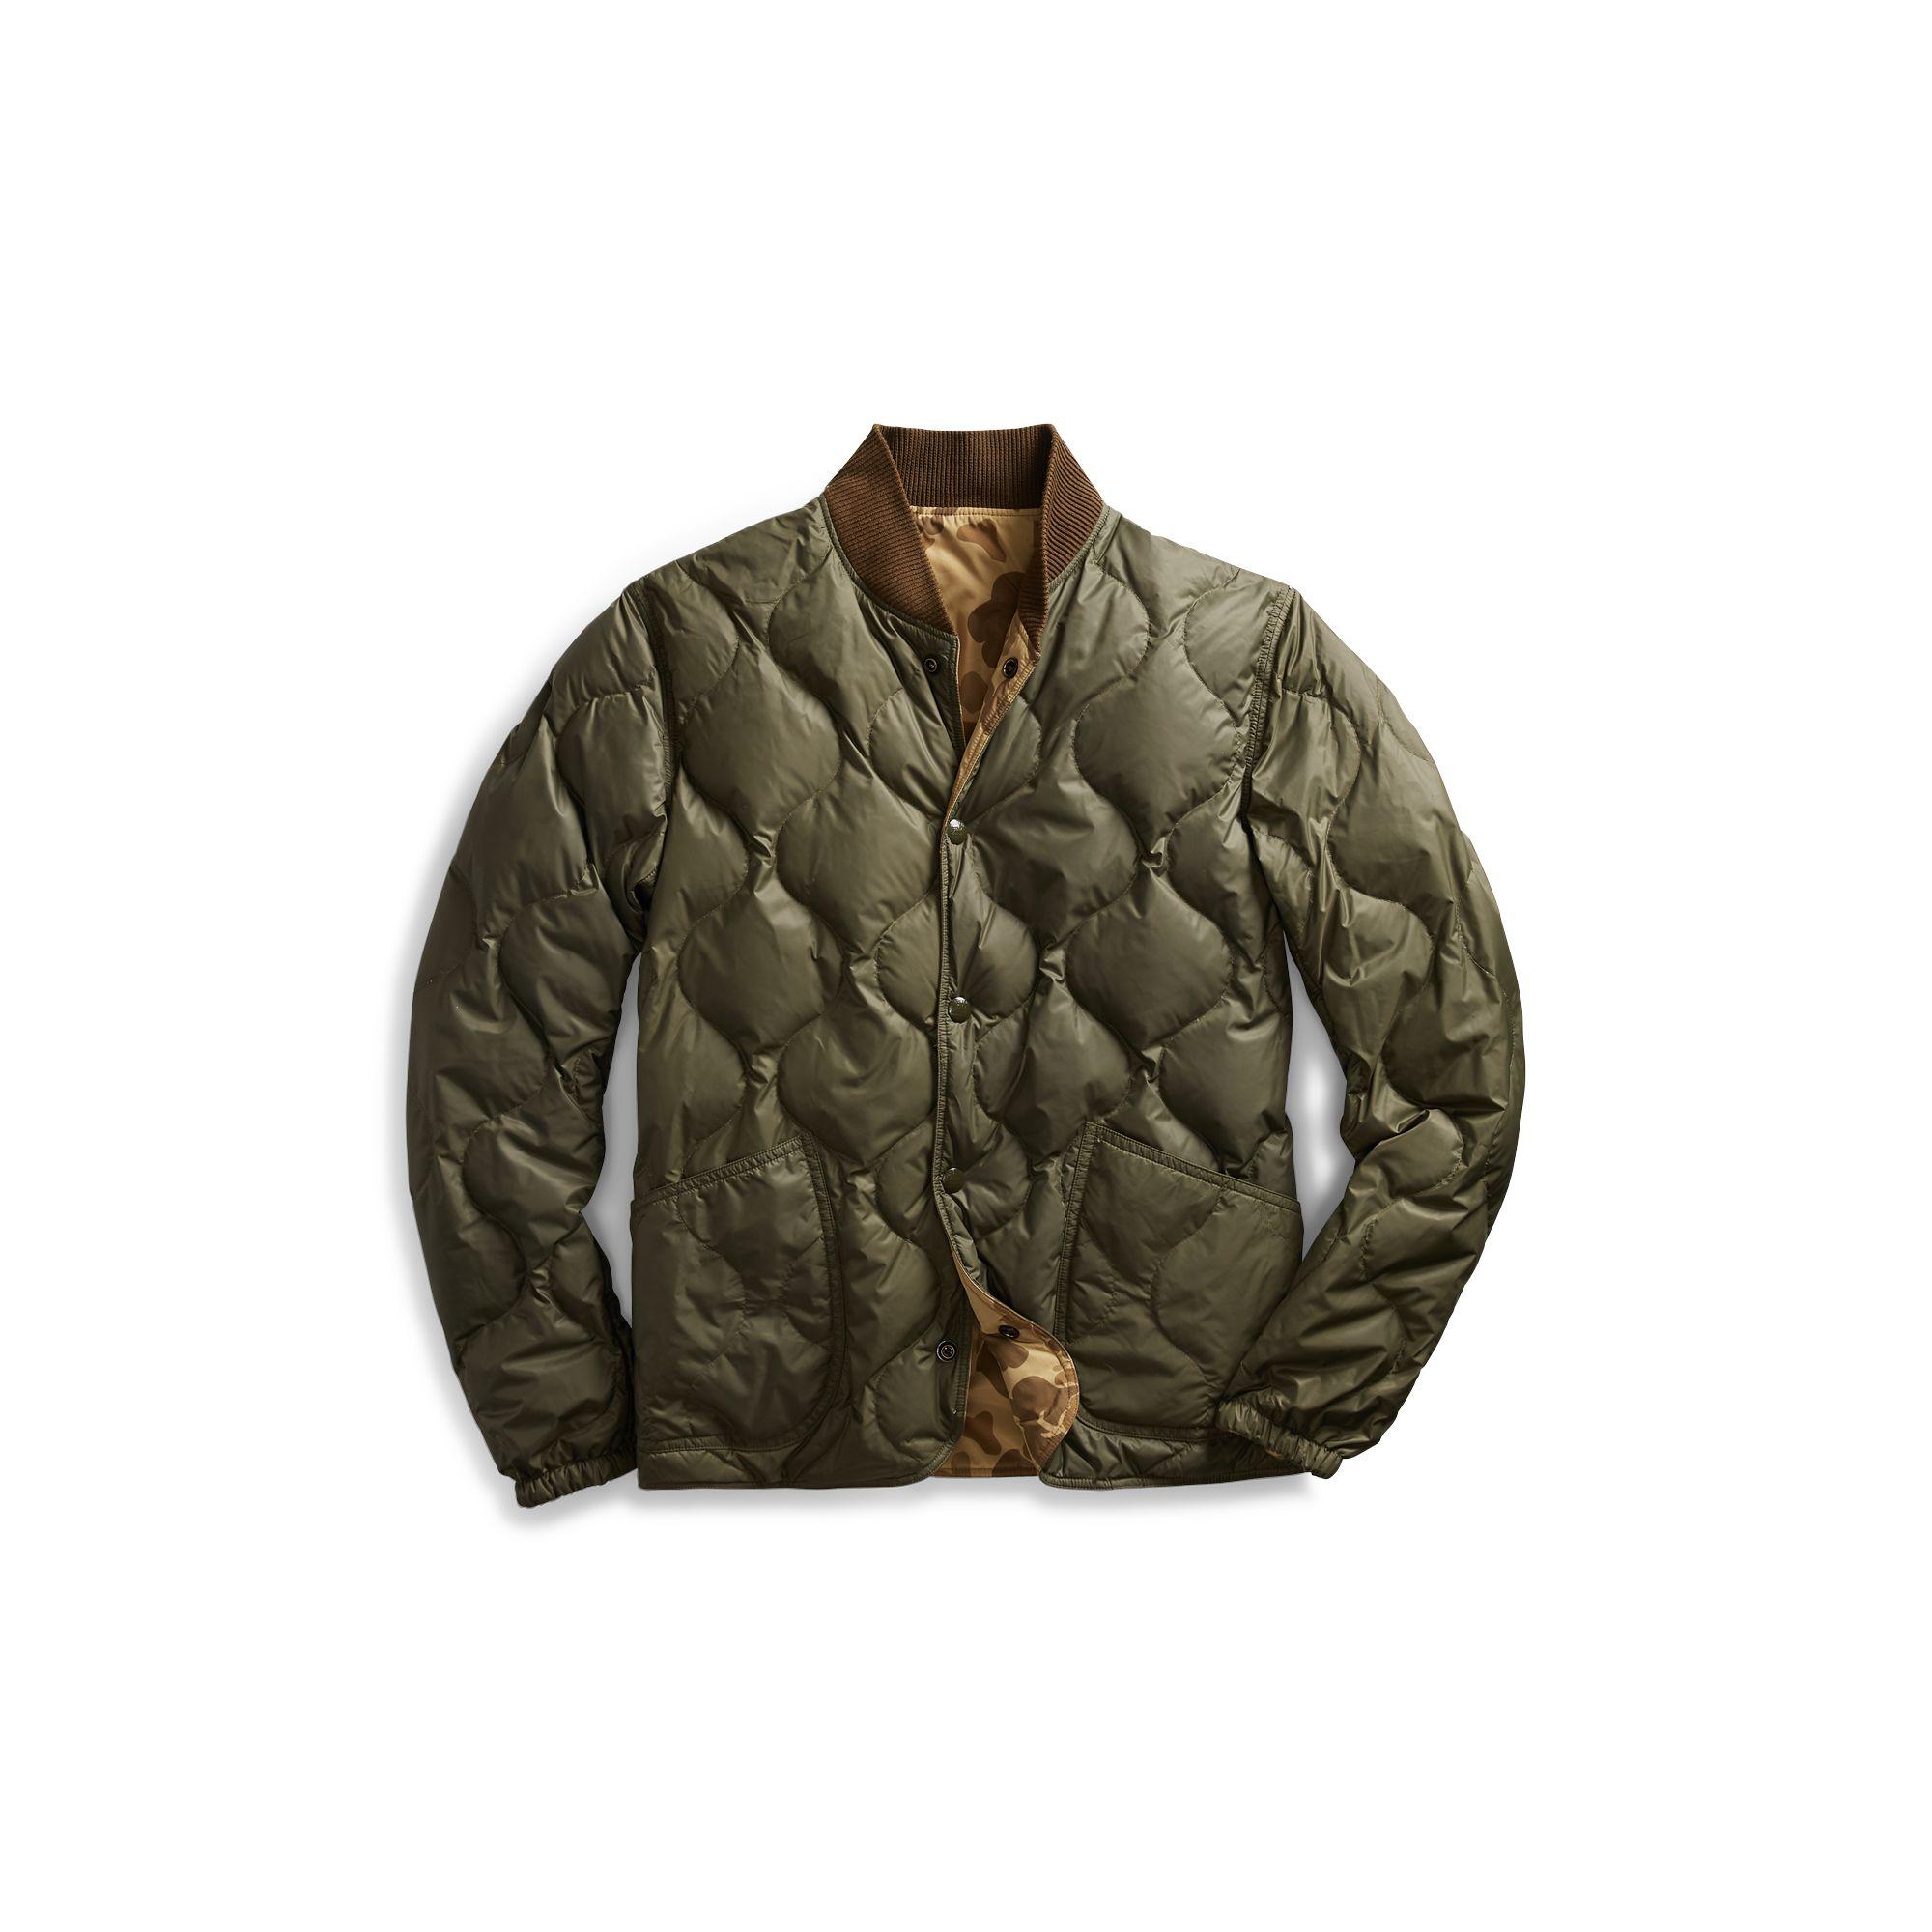 RRL Synthetic Reversible Down Jacket in Olive Camo (Green) for Men - Lyst